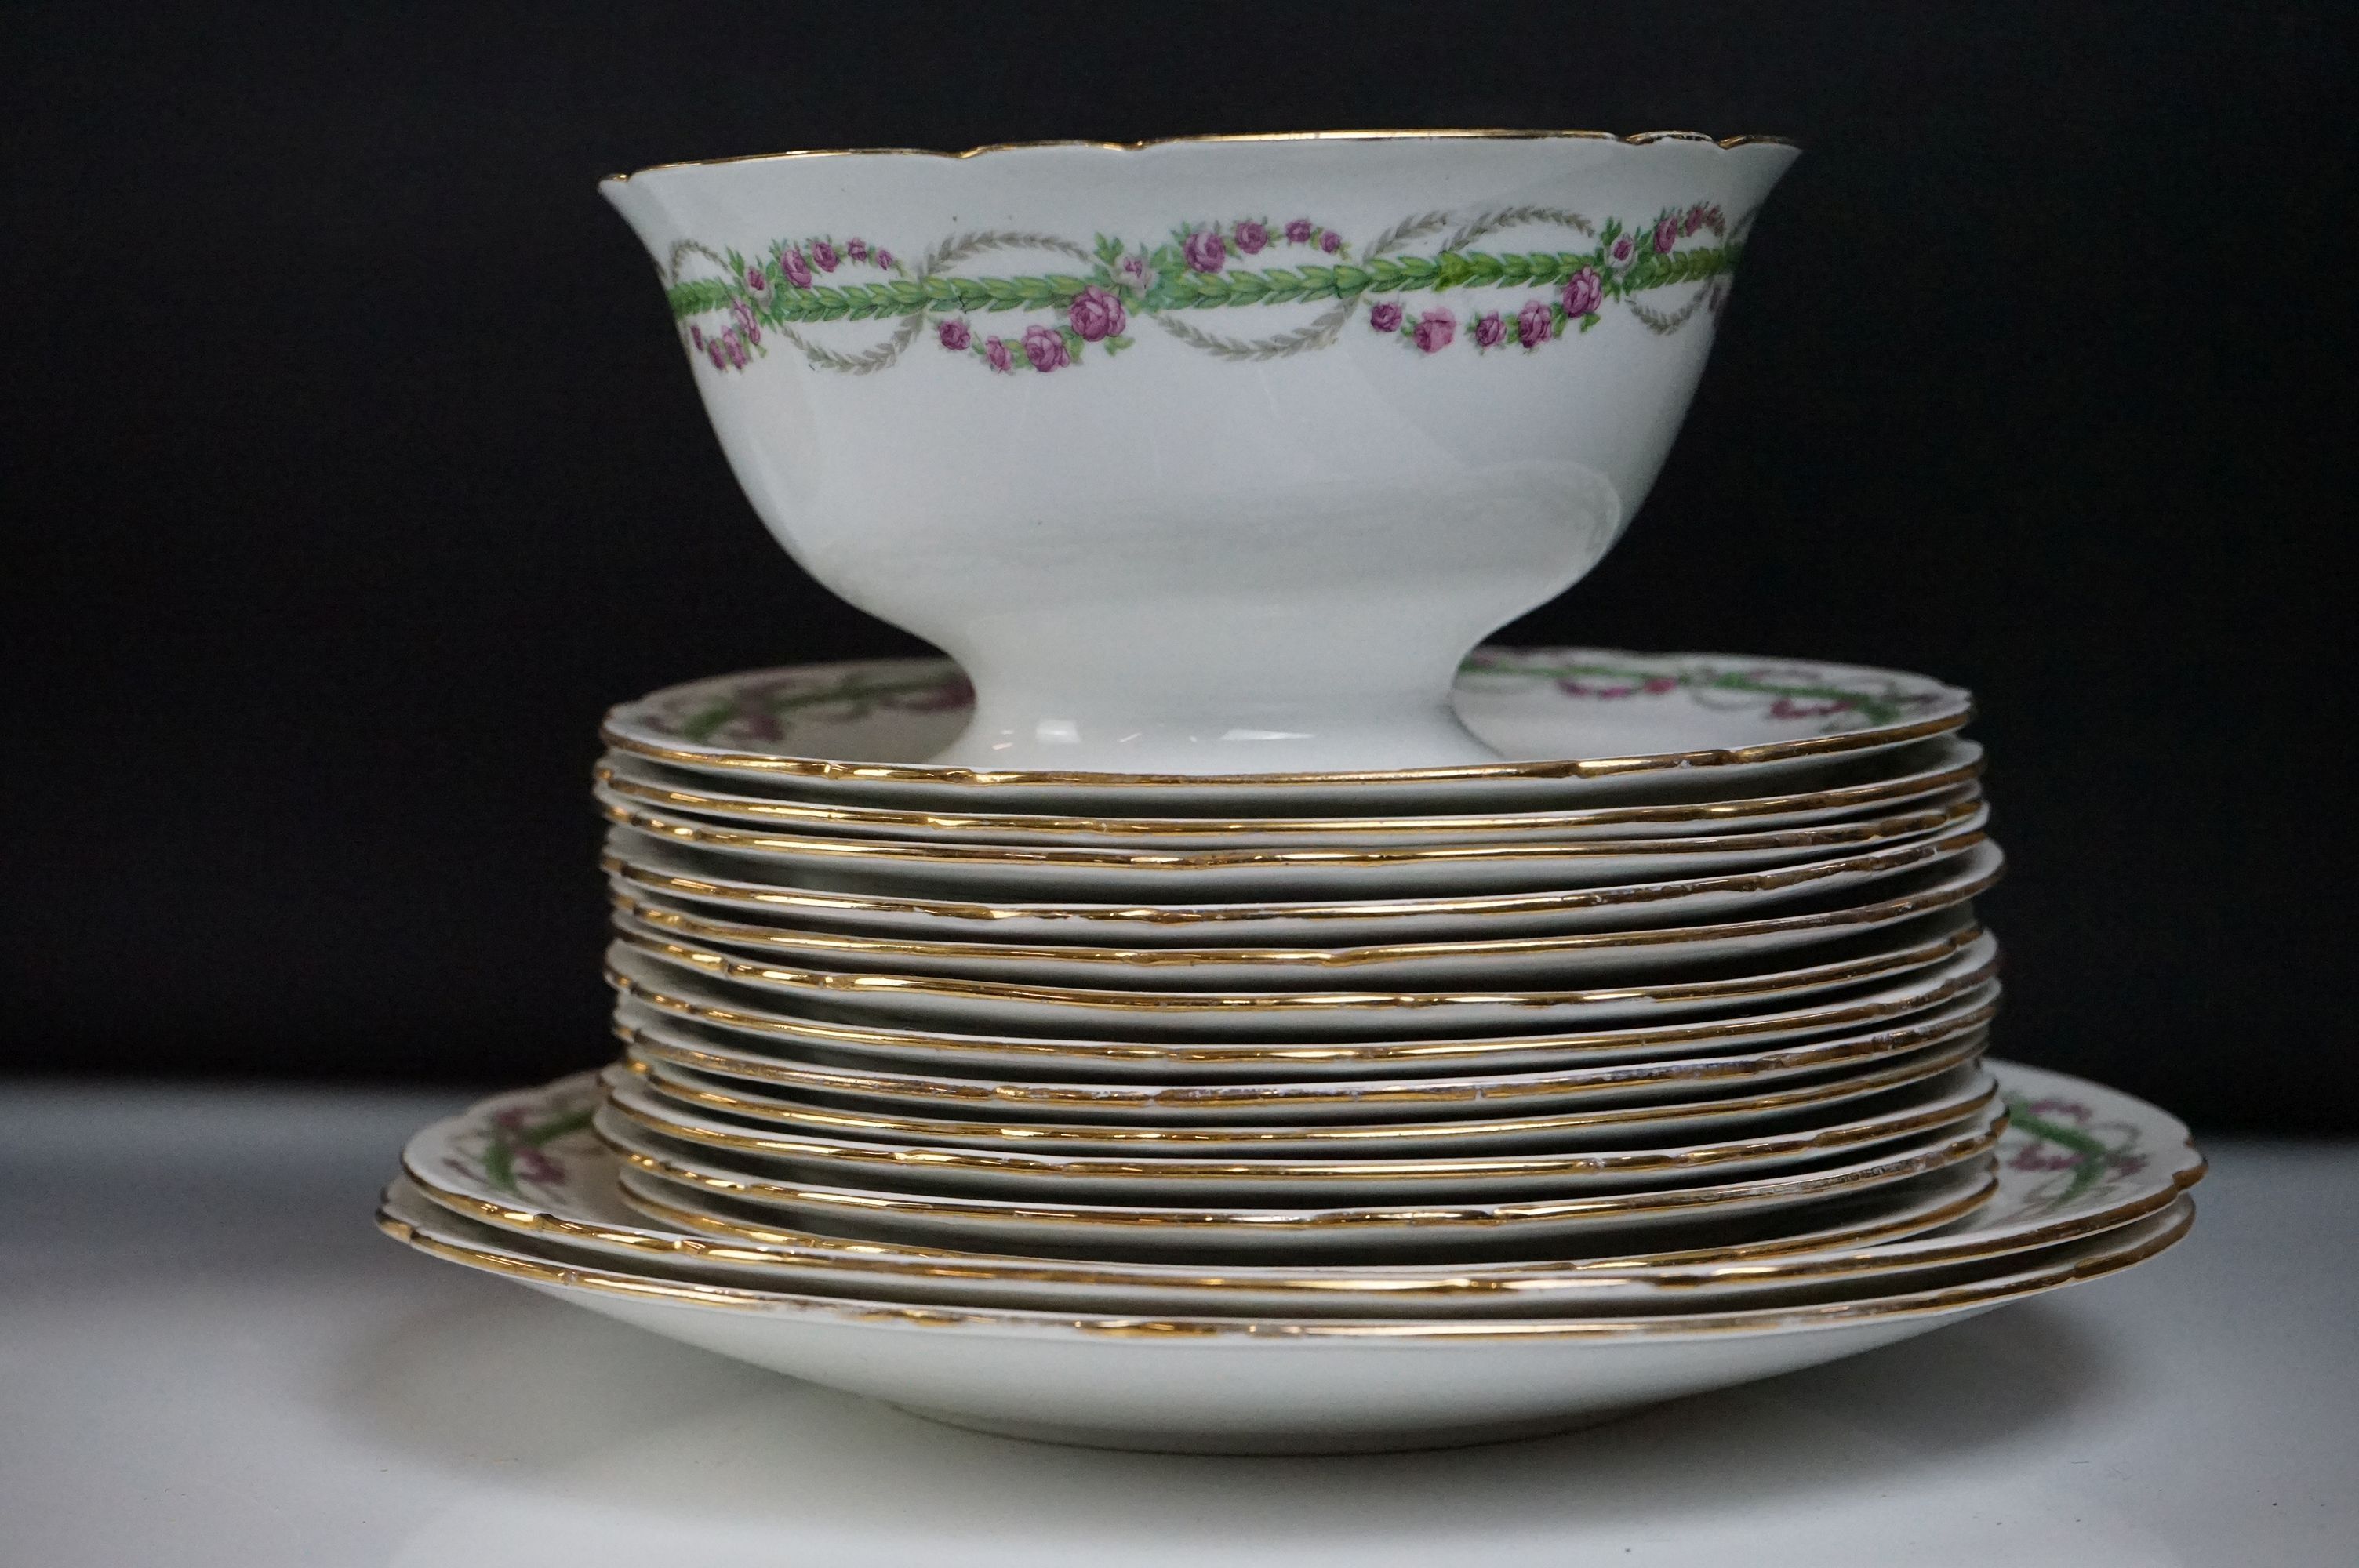 Early 20th Century Shelley ' Late Foley ' tea set, pattern no. 10550, with pink and green floral - Image 8 of 13